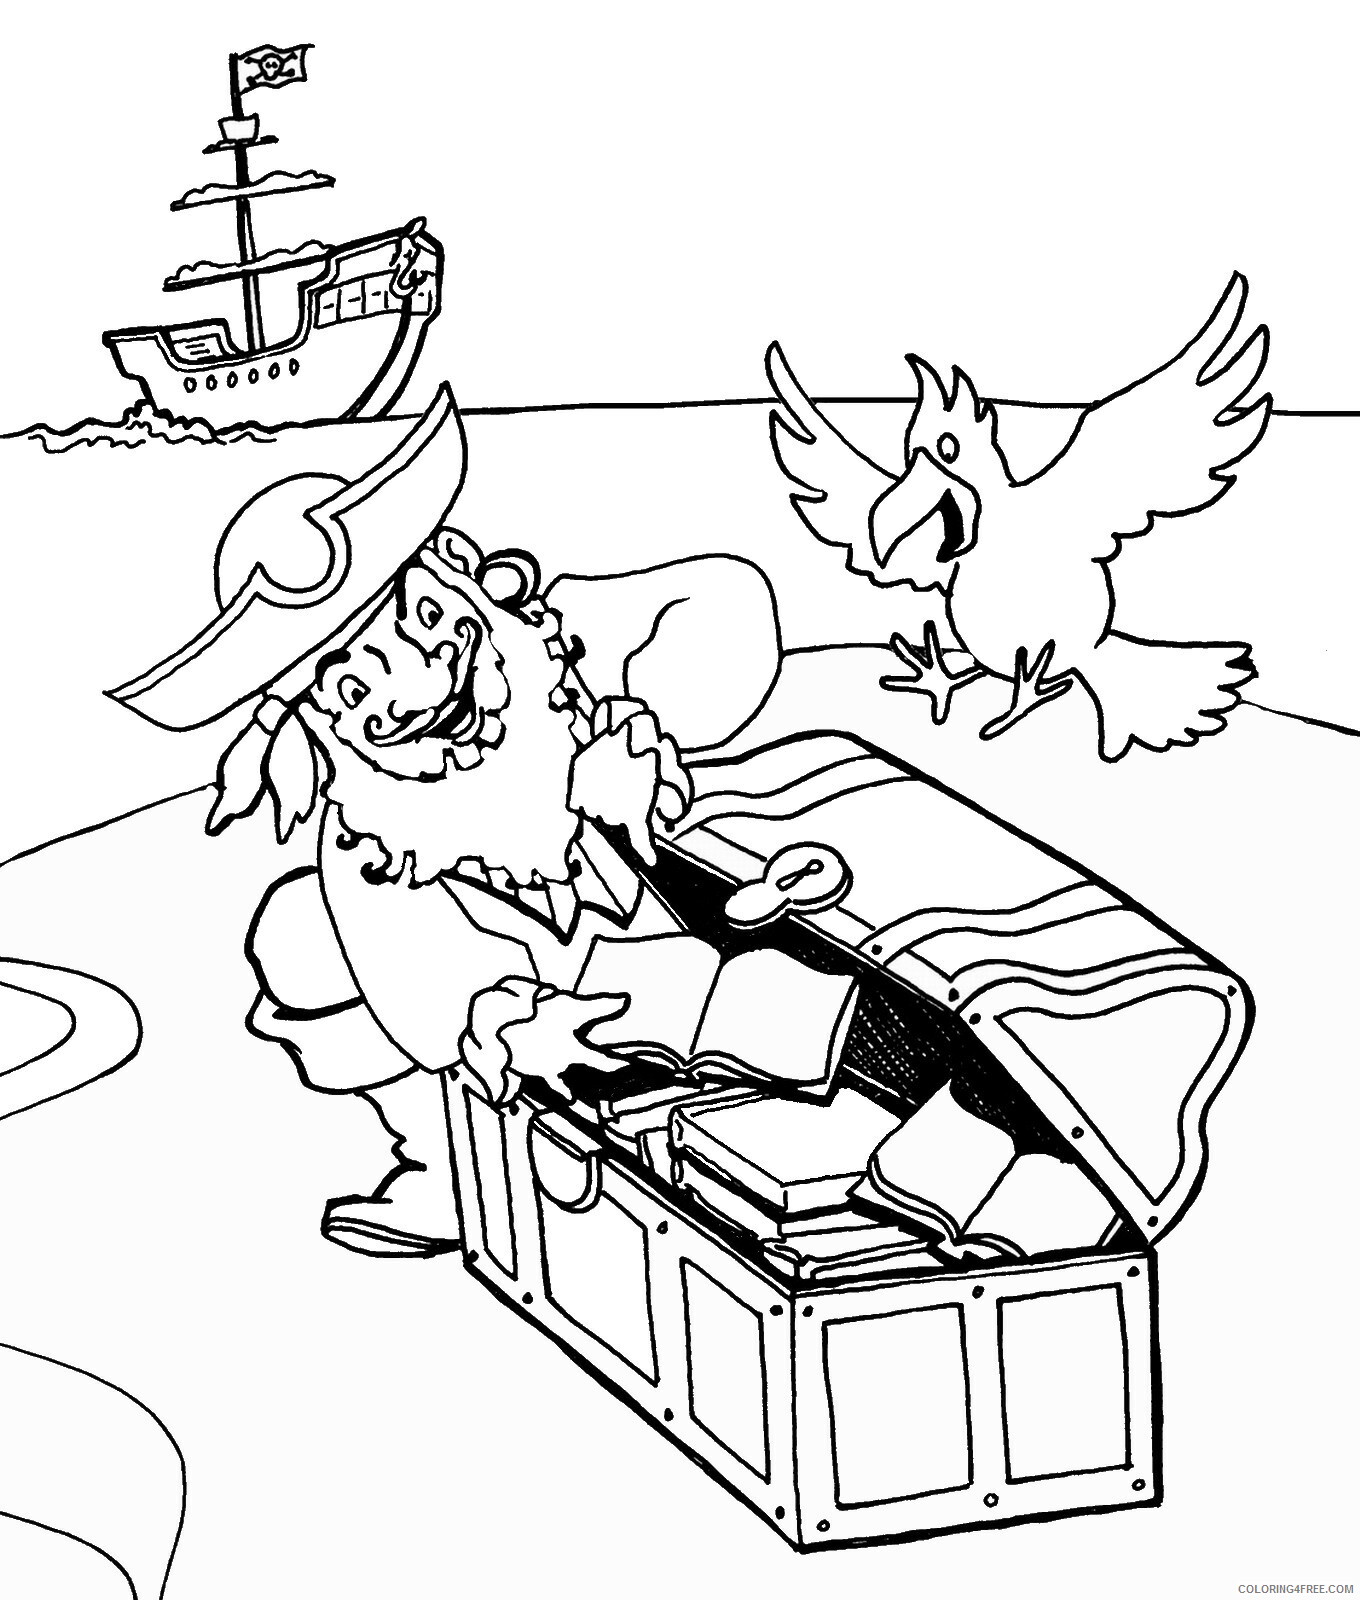 Pirates Coloring Pages for boys piratec64 Printable 2020 0740 Coloring4free